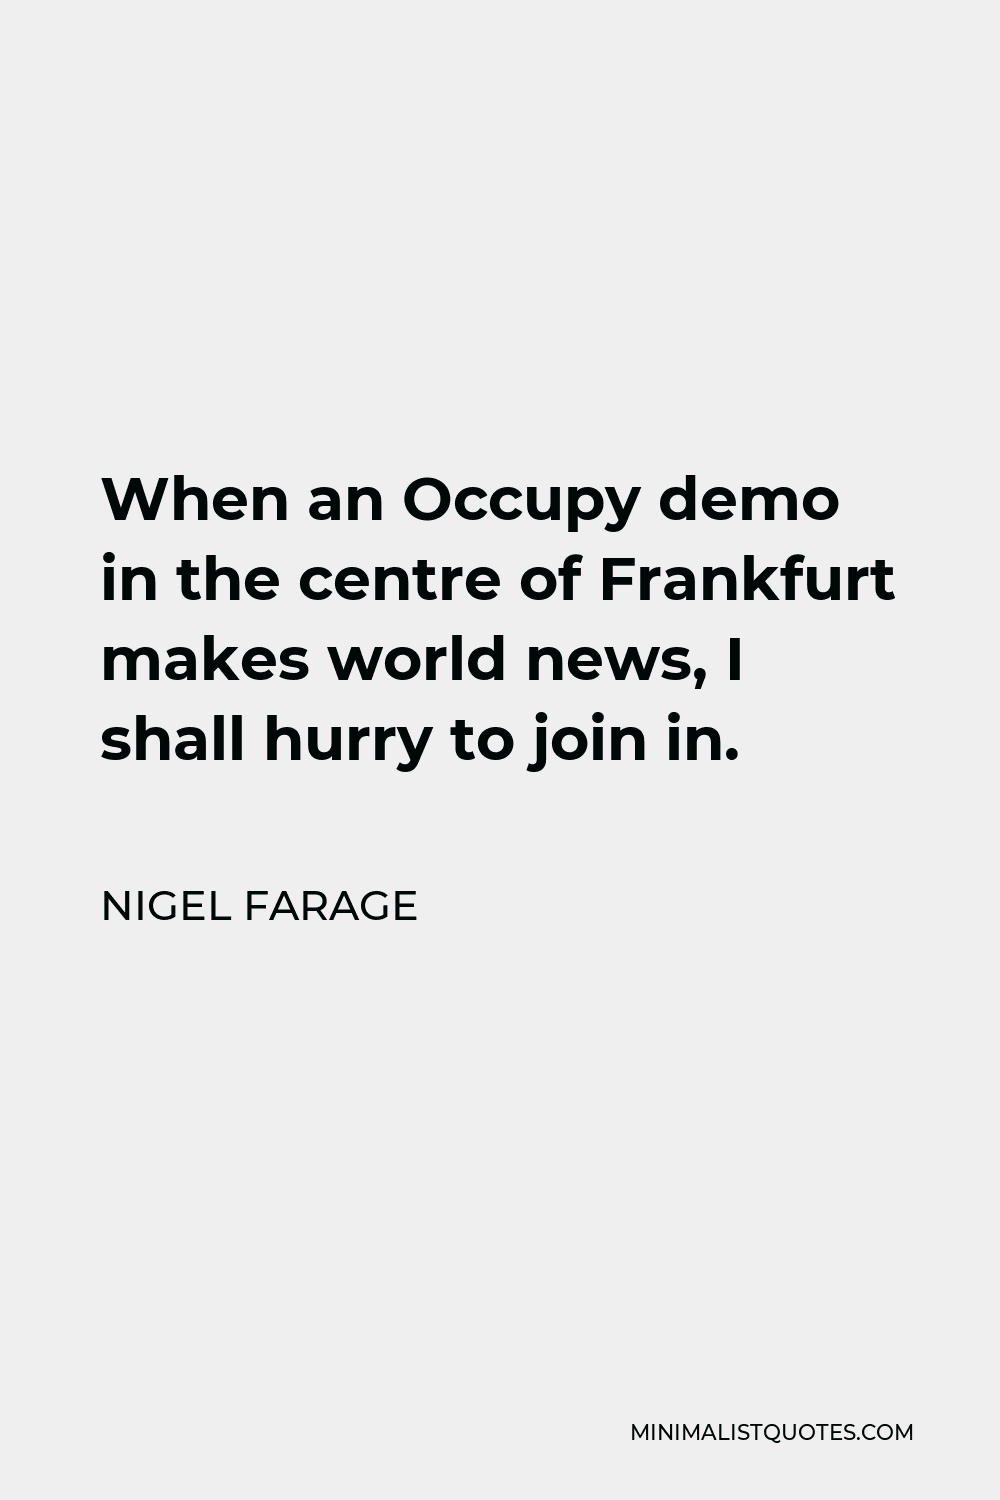 Nigel Farage Quote - When an Occupy demo in the centre of Frankfurt makes world news, I shall hurry to join in.